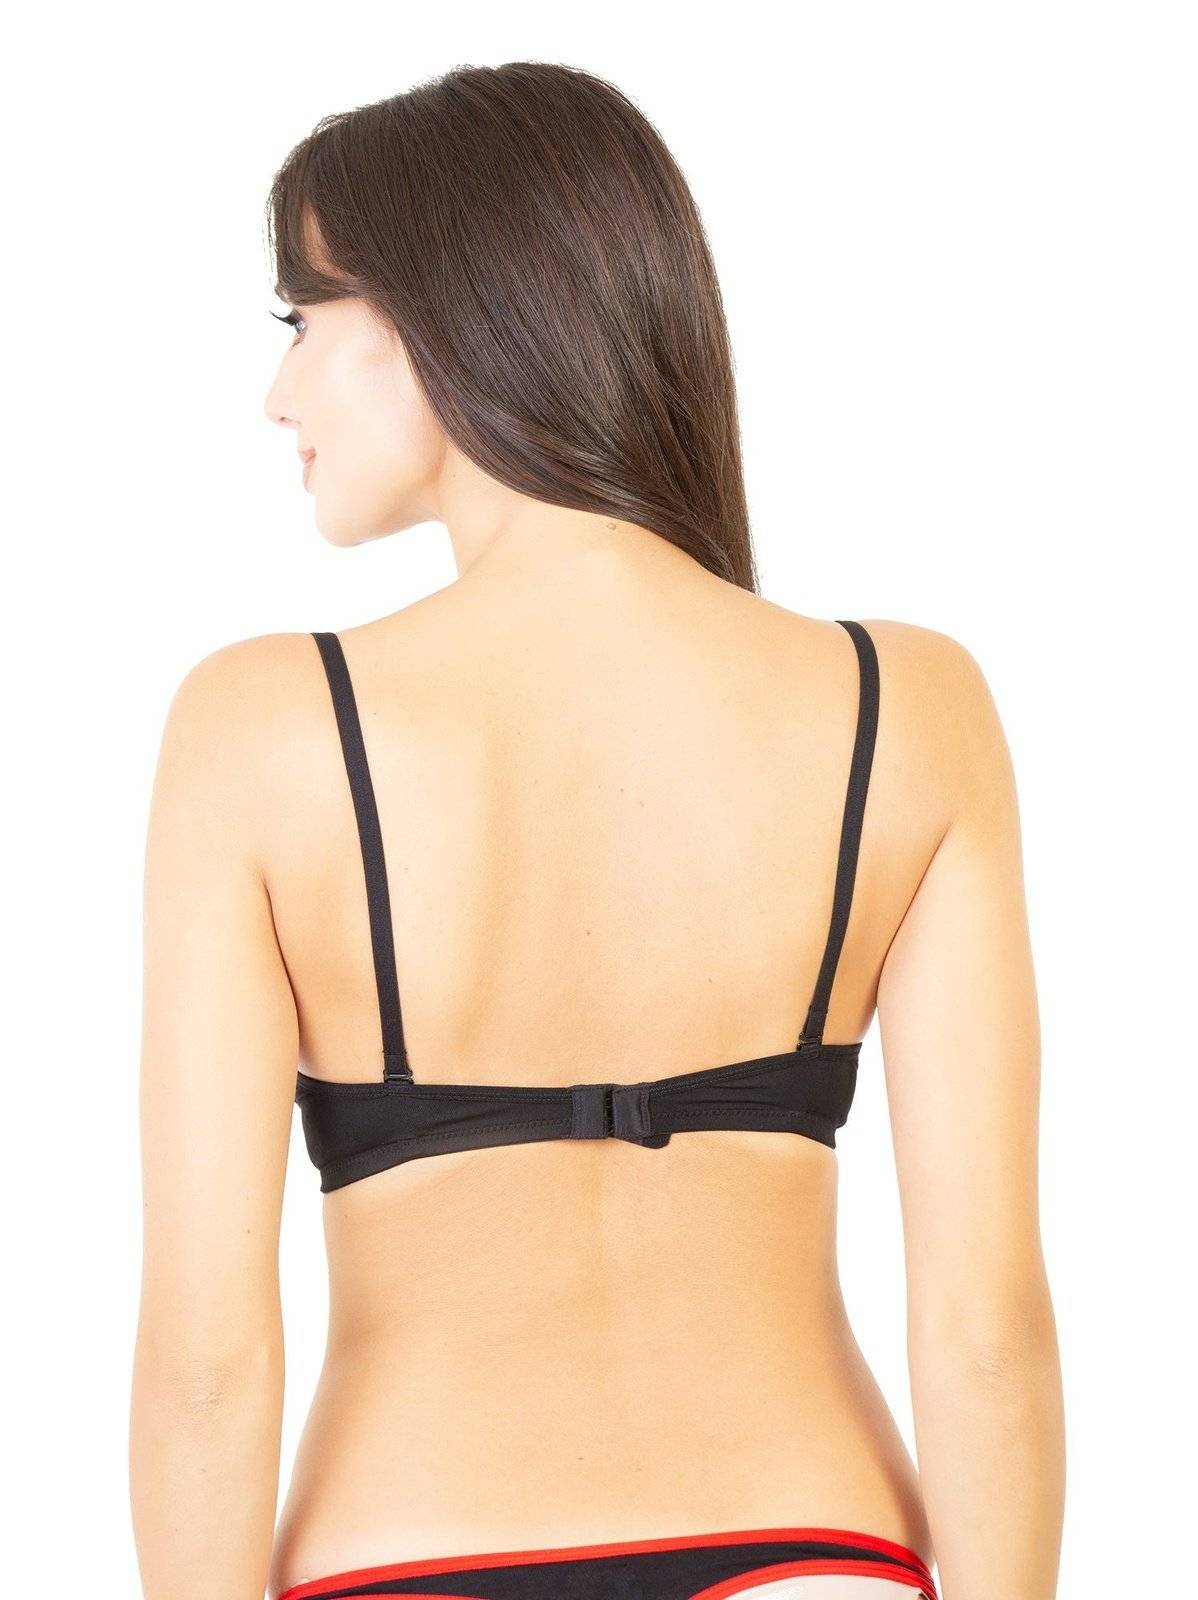 Enerve Padded, Non Wired, 3/4 coverage, T-shirt bra